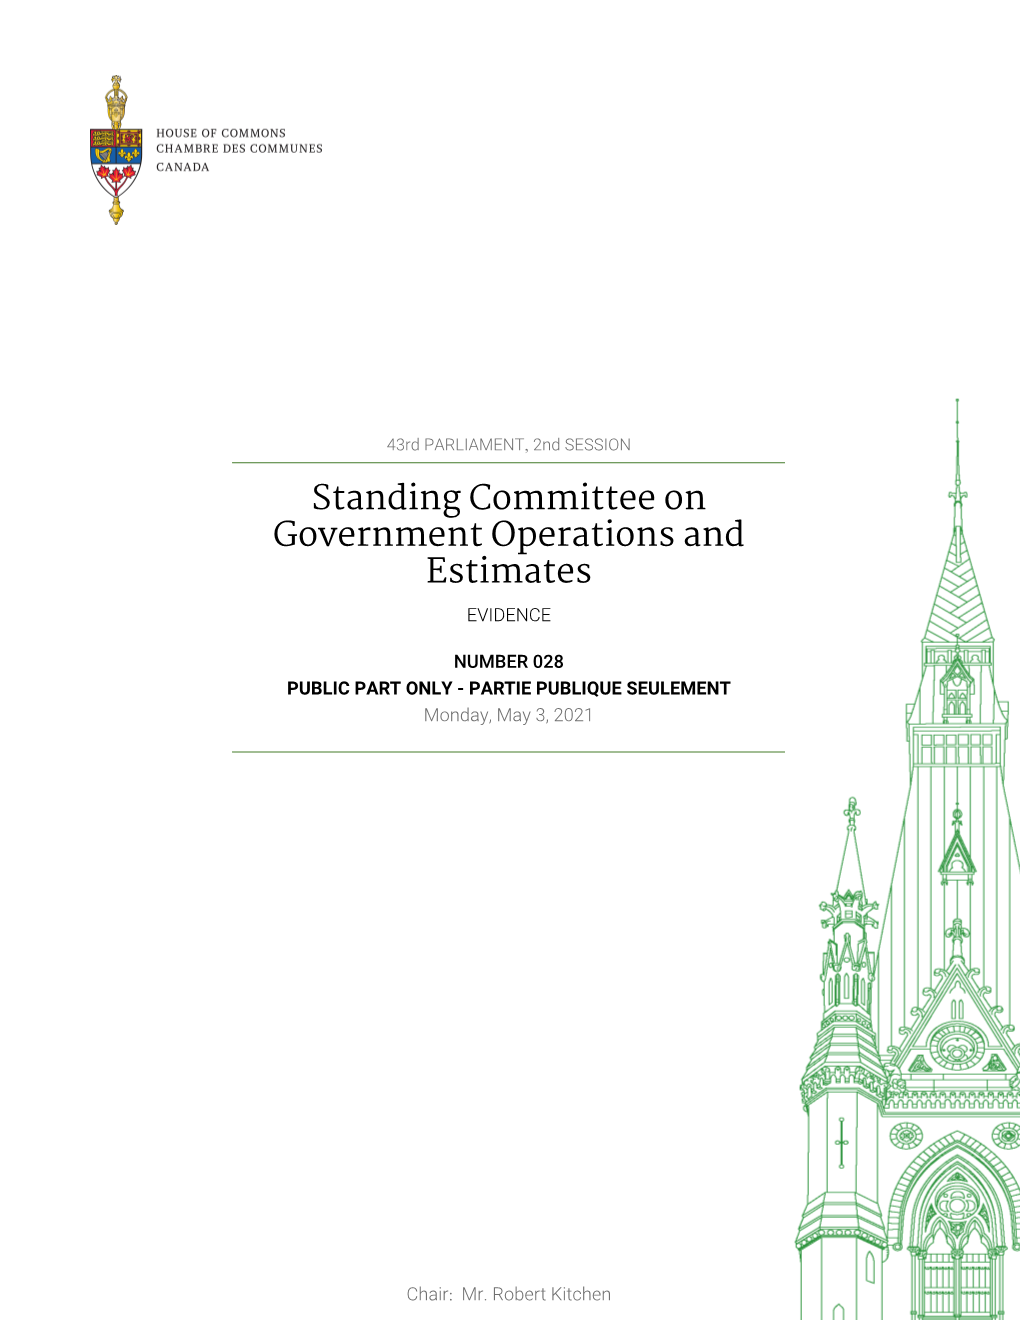 Evidence of the Standing Committee on Government Operations and Estimates